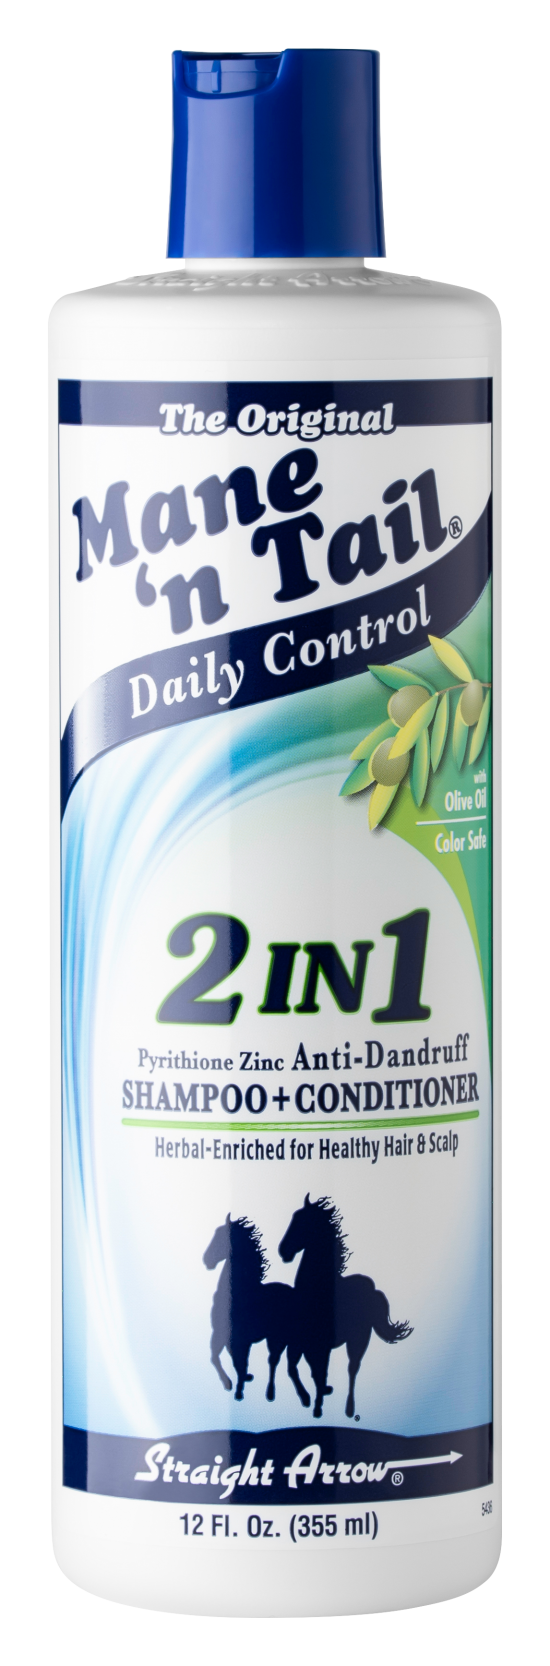 Mane 'n Tail - Daily Control 2 in 1 Shampoo+ Conditioning